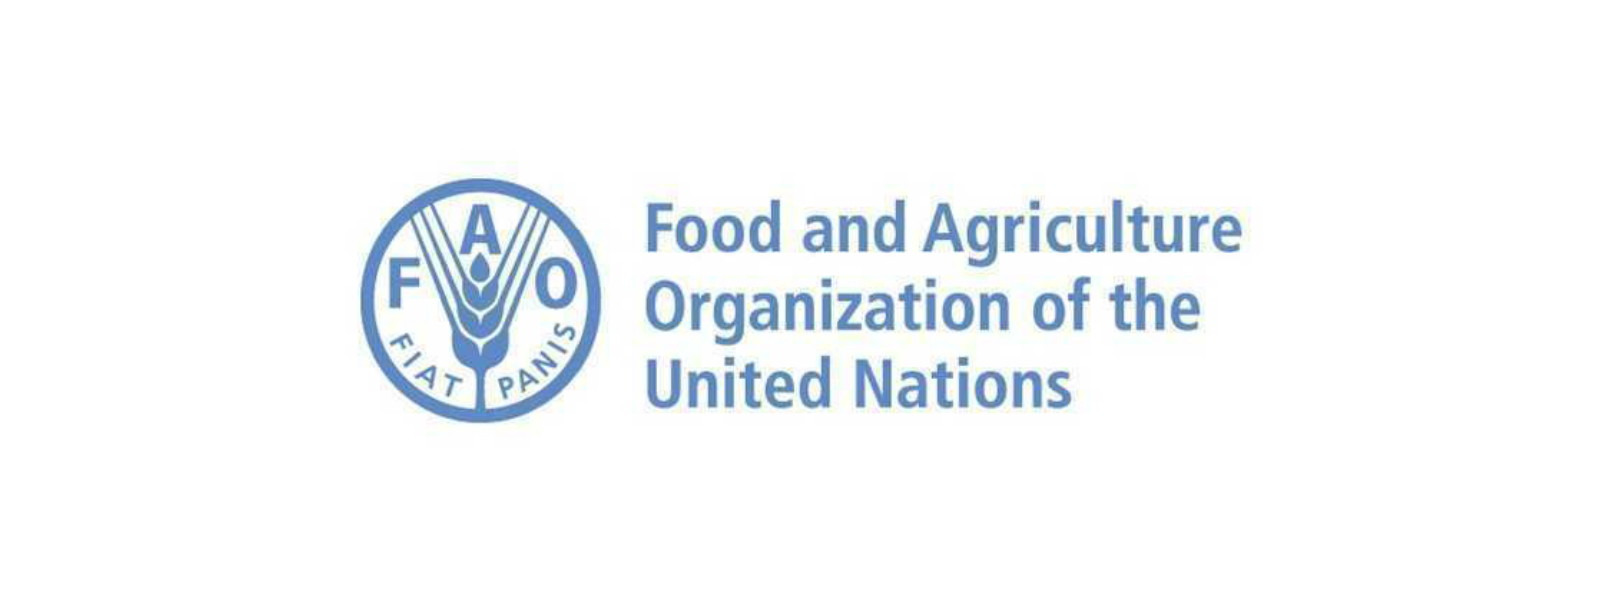 UN FAO Regional Conference Opens Today (19)